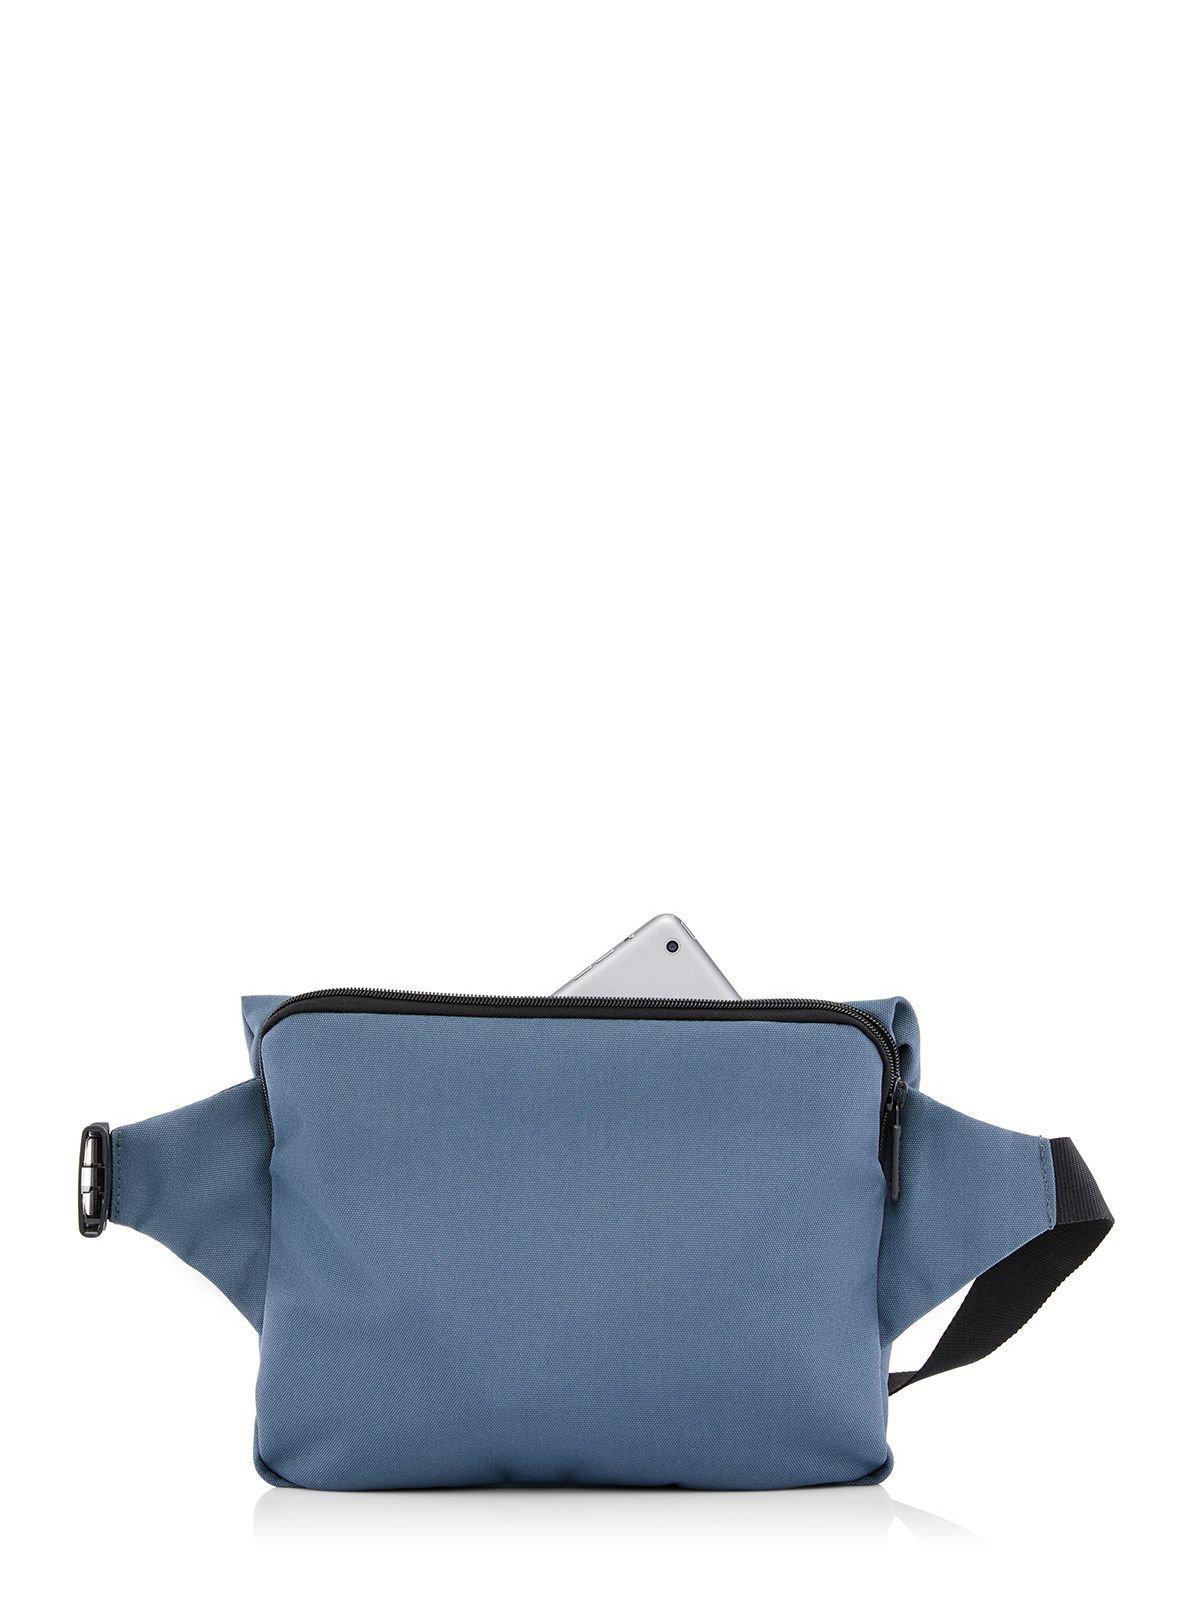 Crumpler Mini Rocket Roll Top Messenger Blue Lead - MORE by Morello Indonesia